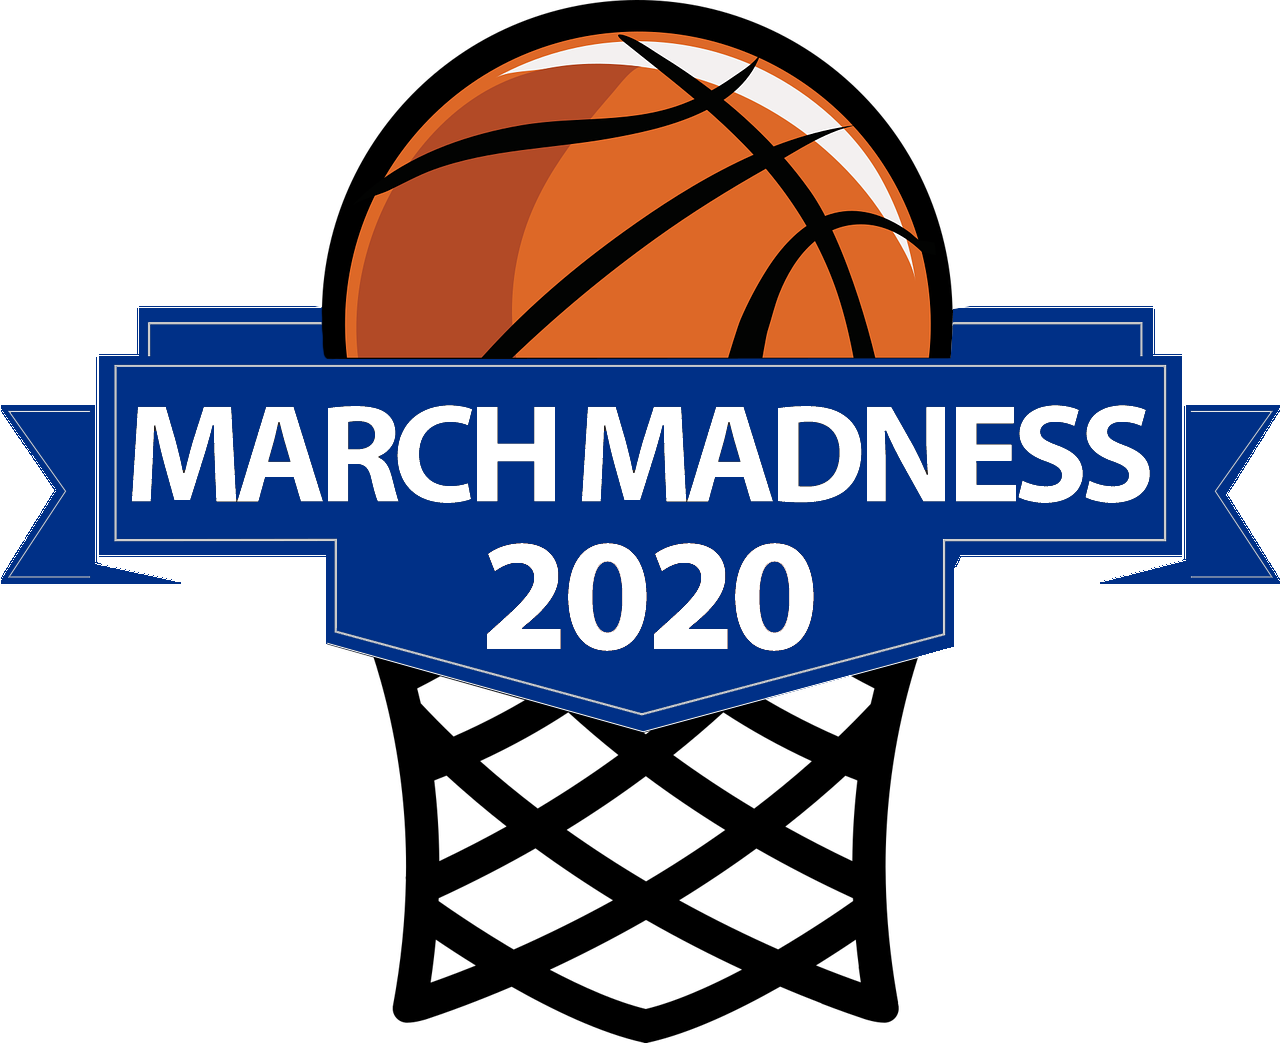 March Madness 2020